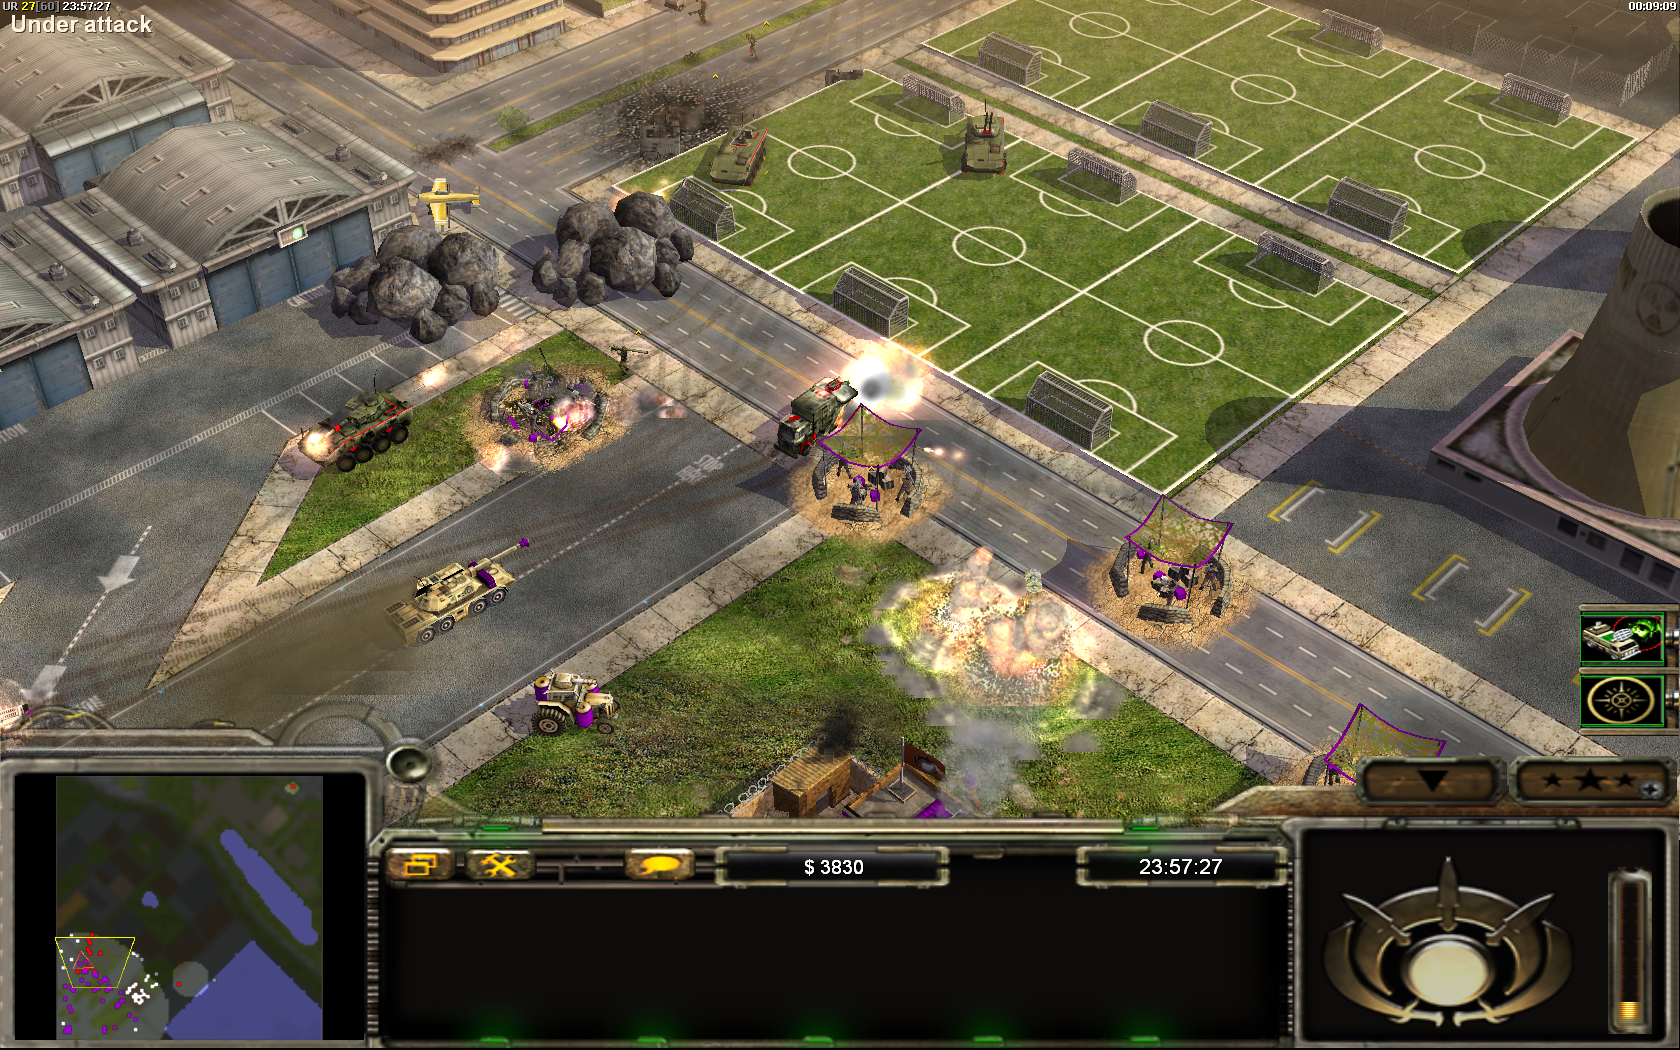 Command conquer читы. Command and Conquer Zero hour contra 009. Command and Conquer Generals contra 009. Command Conquer Generals Контра 009. Command and Conquer Generals Zero hour contra 009.